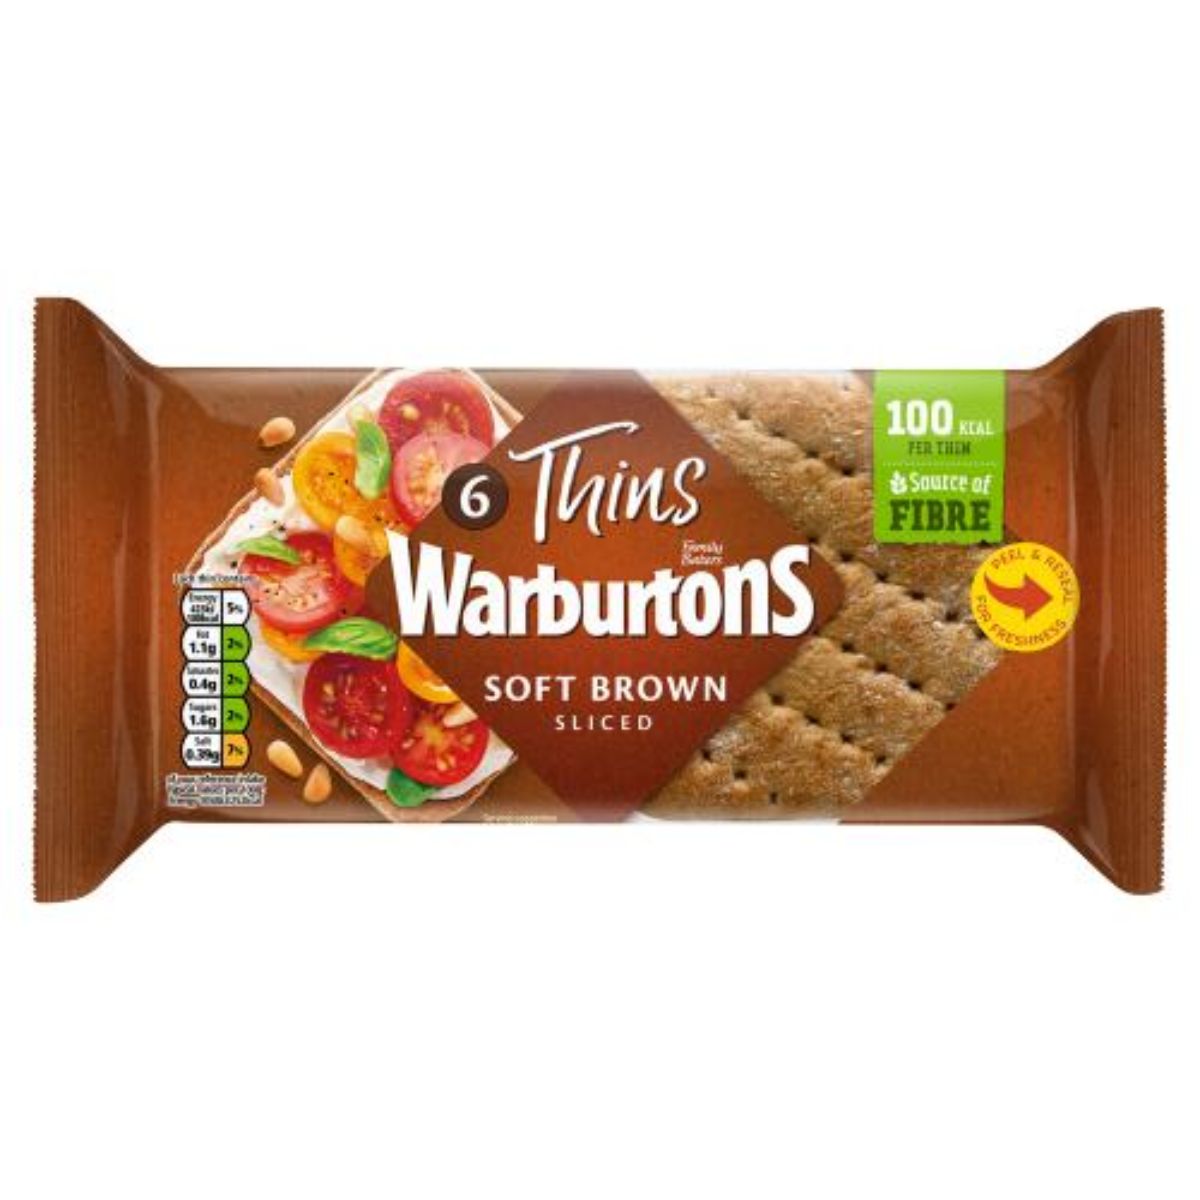 Warburtons - Thins Soft Brown Sliced - 6pcs soft brown crackers.